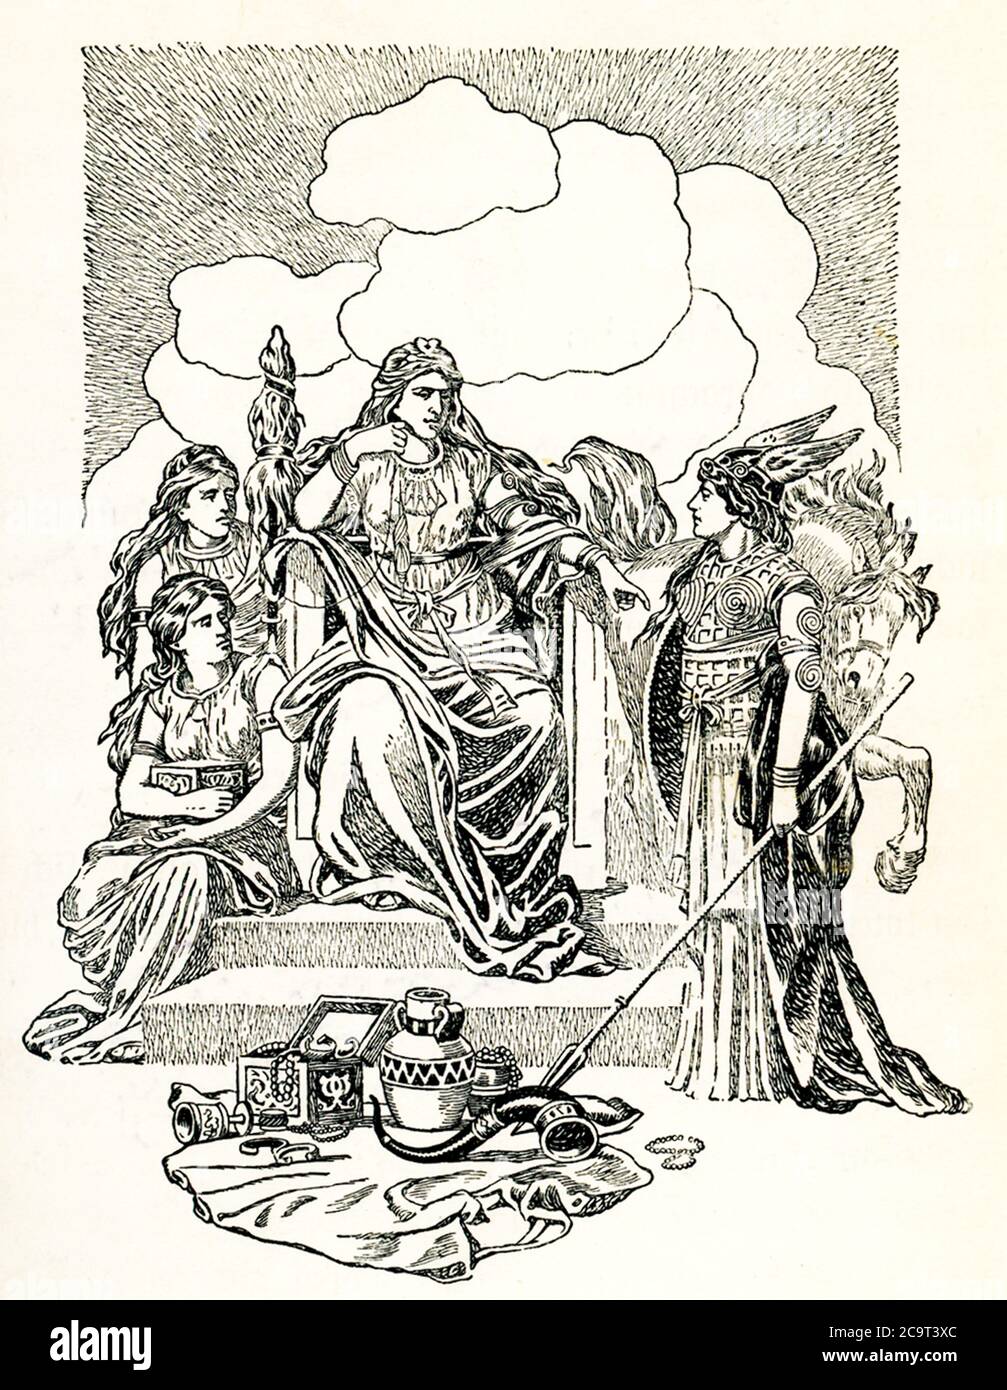 This illustration shows a Valkyrie before the goddess Freya. In  Norse mythology, the Valkyries came to battlefield, chose those who would die, and carried them back to Valhalla. In Norse mythology, Freya, also spelled Freyja, was the goddess of fertility, love and marriage, and light and peace. Her brother was Freyr. Stock Photo